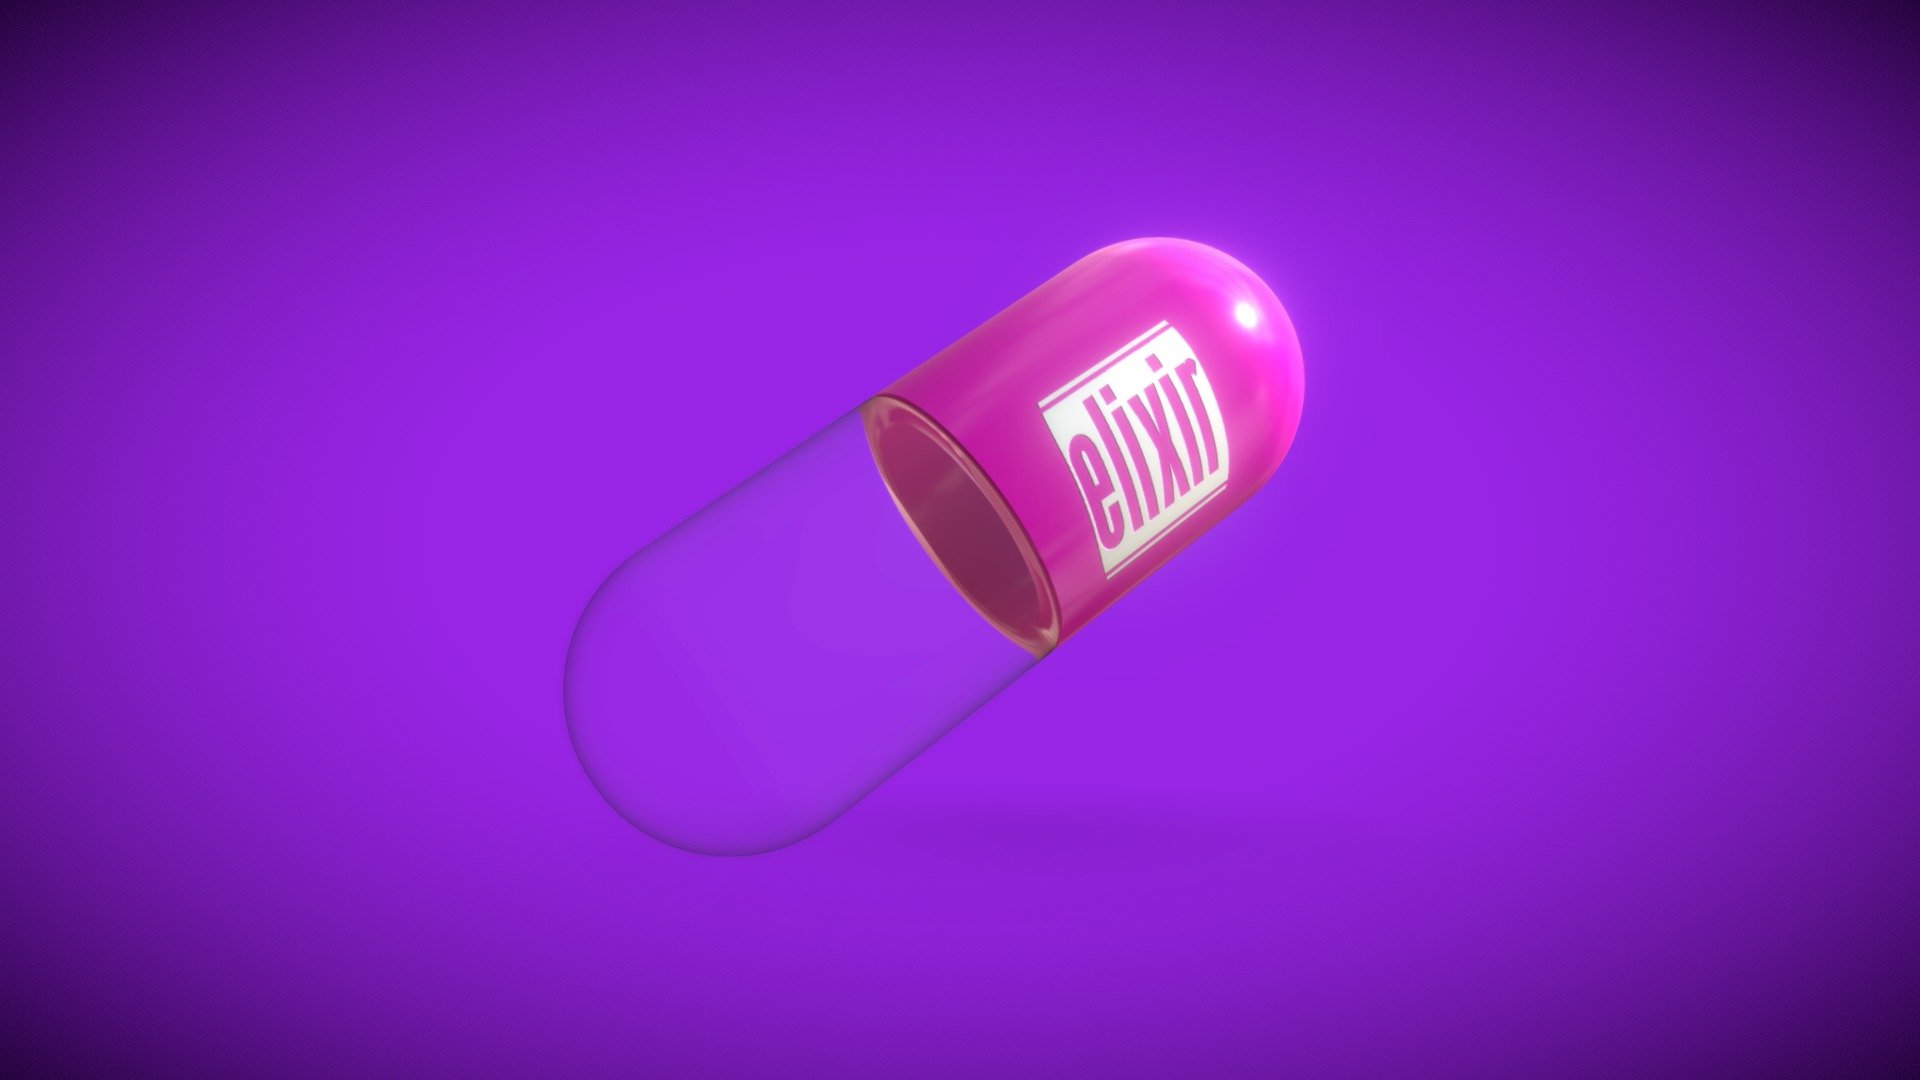 Preview of the model for a client - Elixir Pill - 3D model by Frankie Suchan (@sirfoggyforest) 3d model